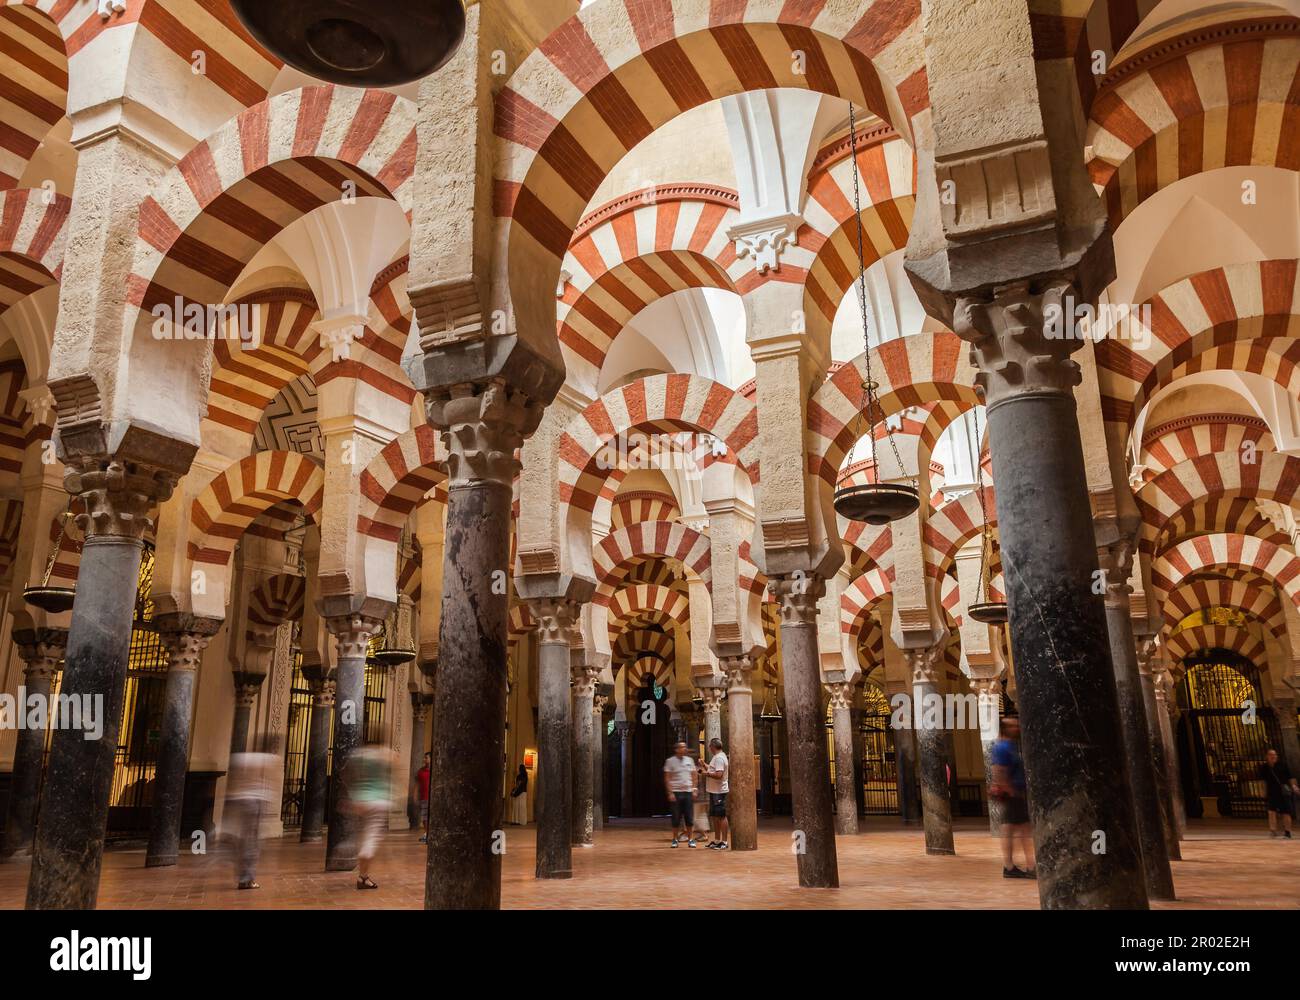 The Mosque-Cathedral of Cordoba is the most significant monument in the whole of the western Moslem World and one of the most amazing buildings in Stock Photo